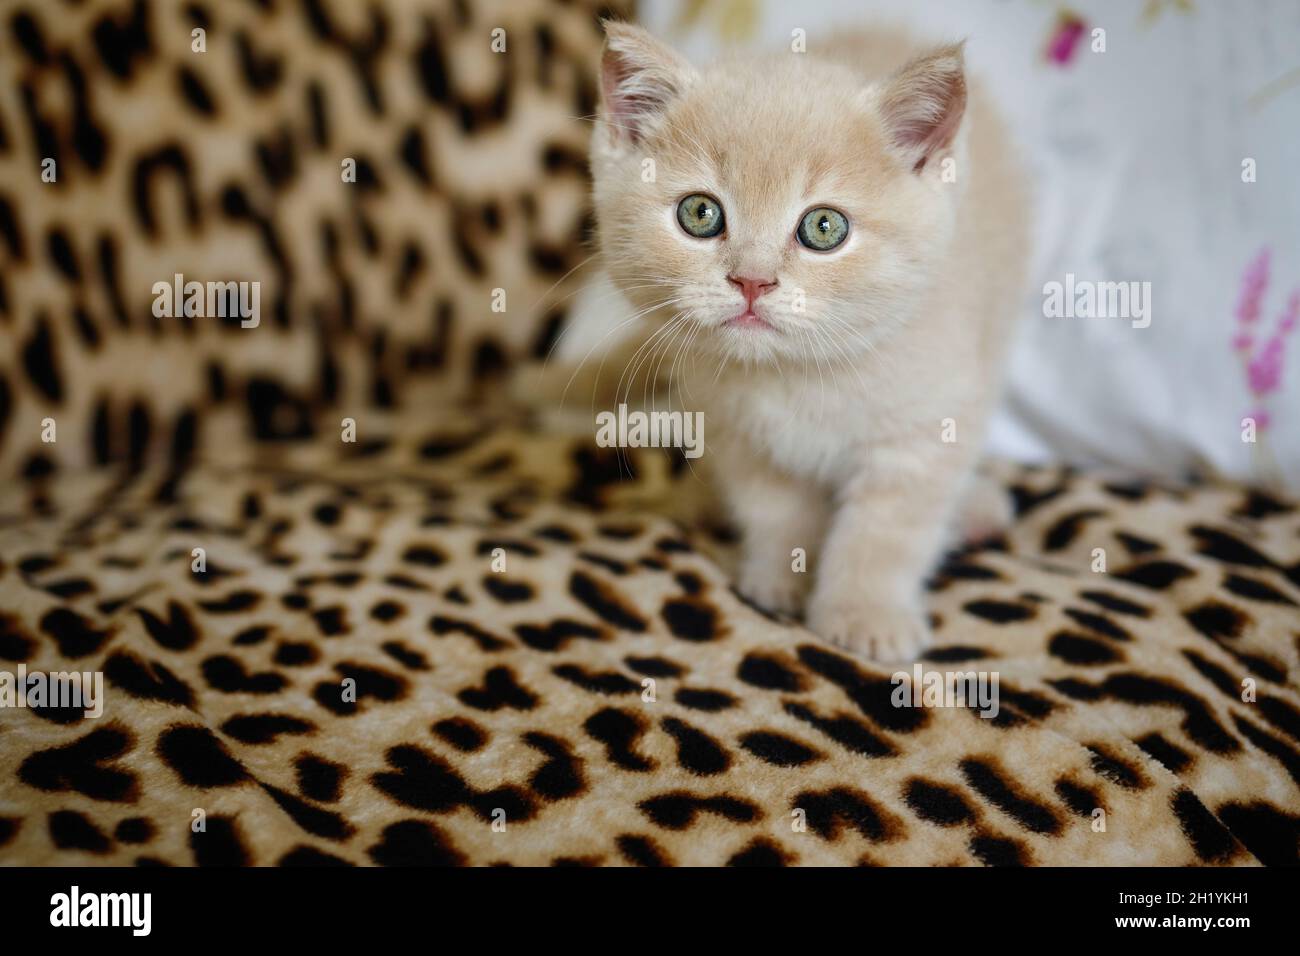 Portrait of a cute fluffy kitten with a ginger coat and green eyes standing on a sofa and looking at the camera Stock Photo